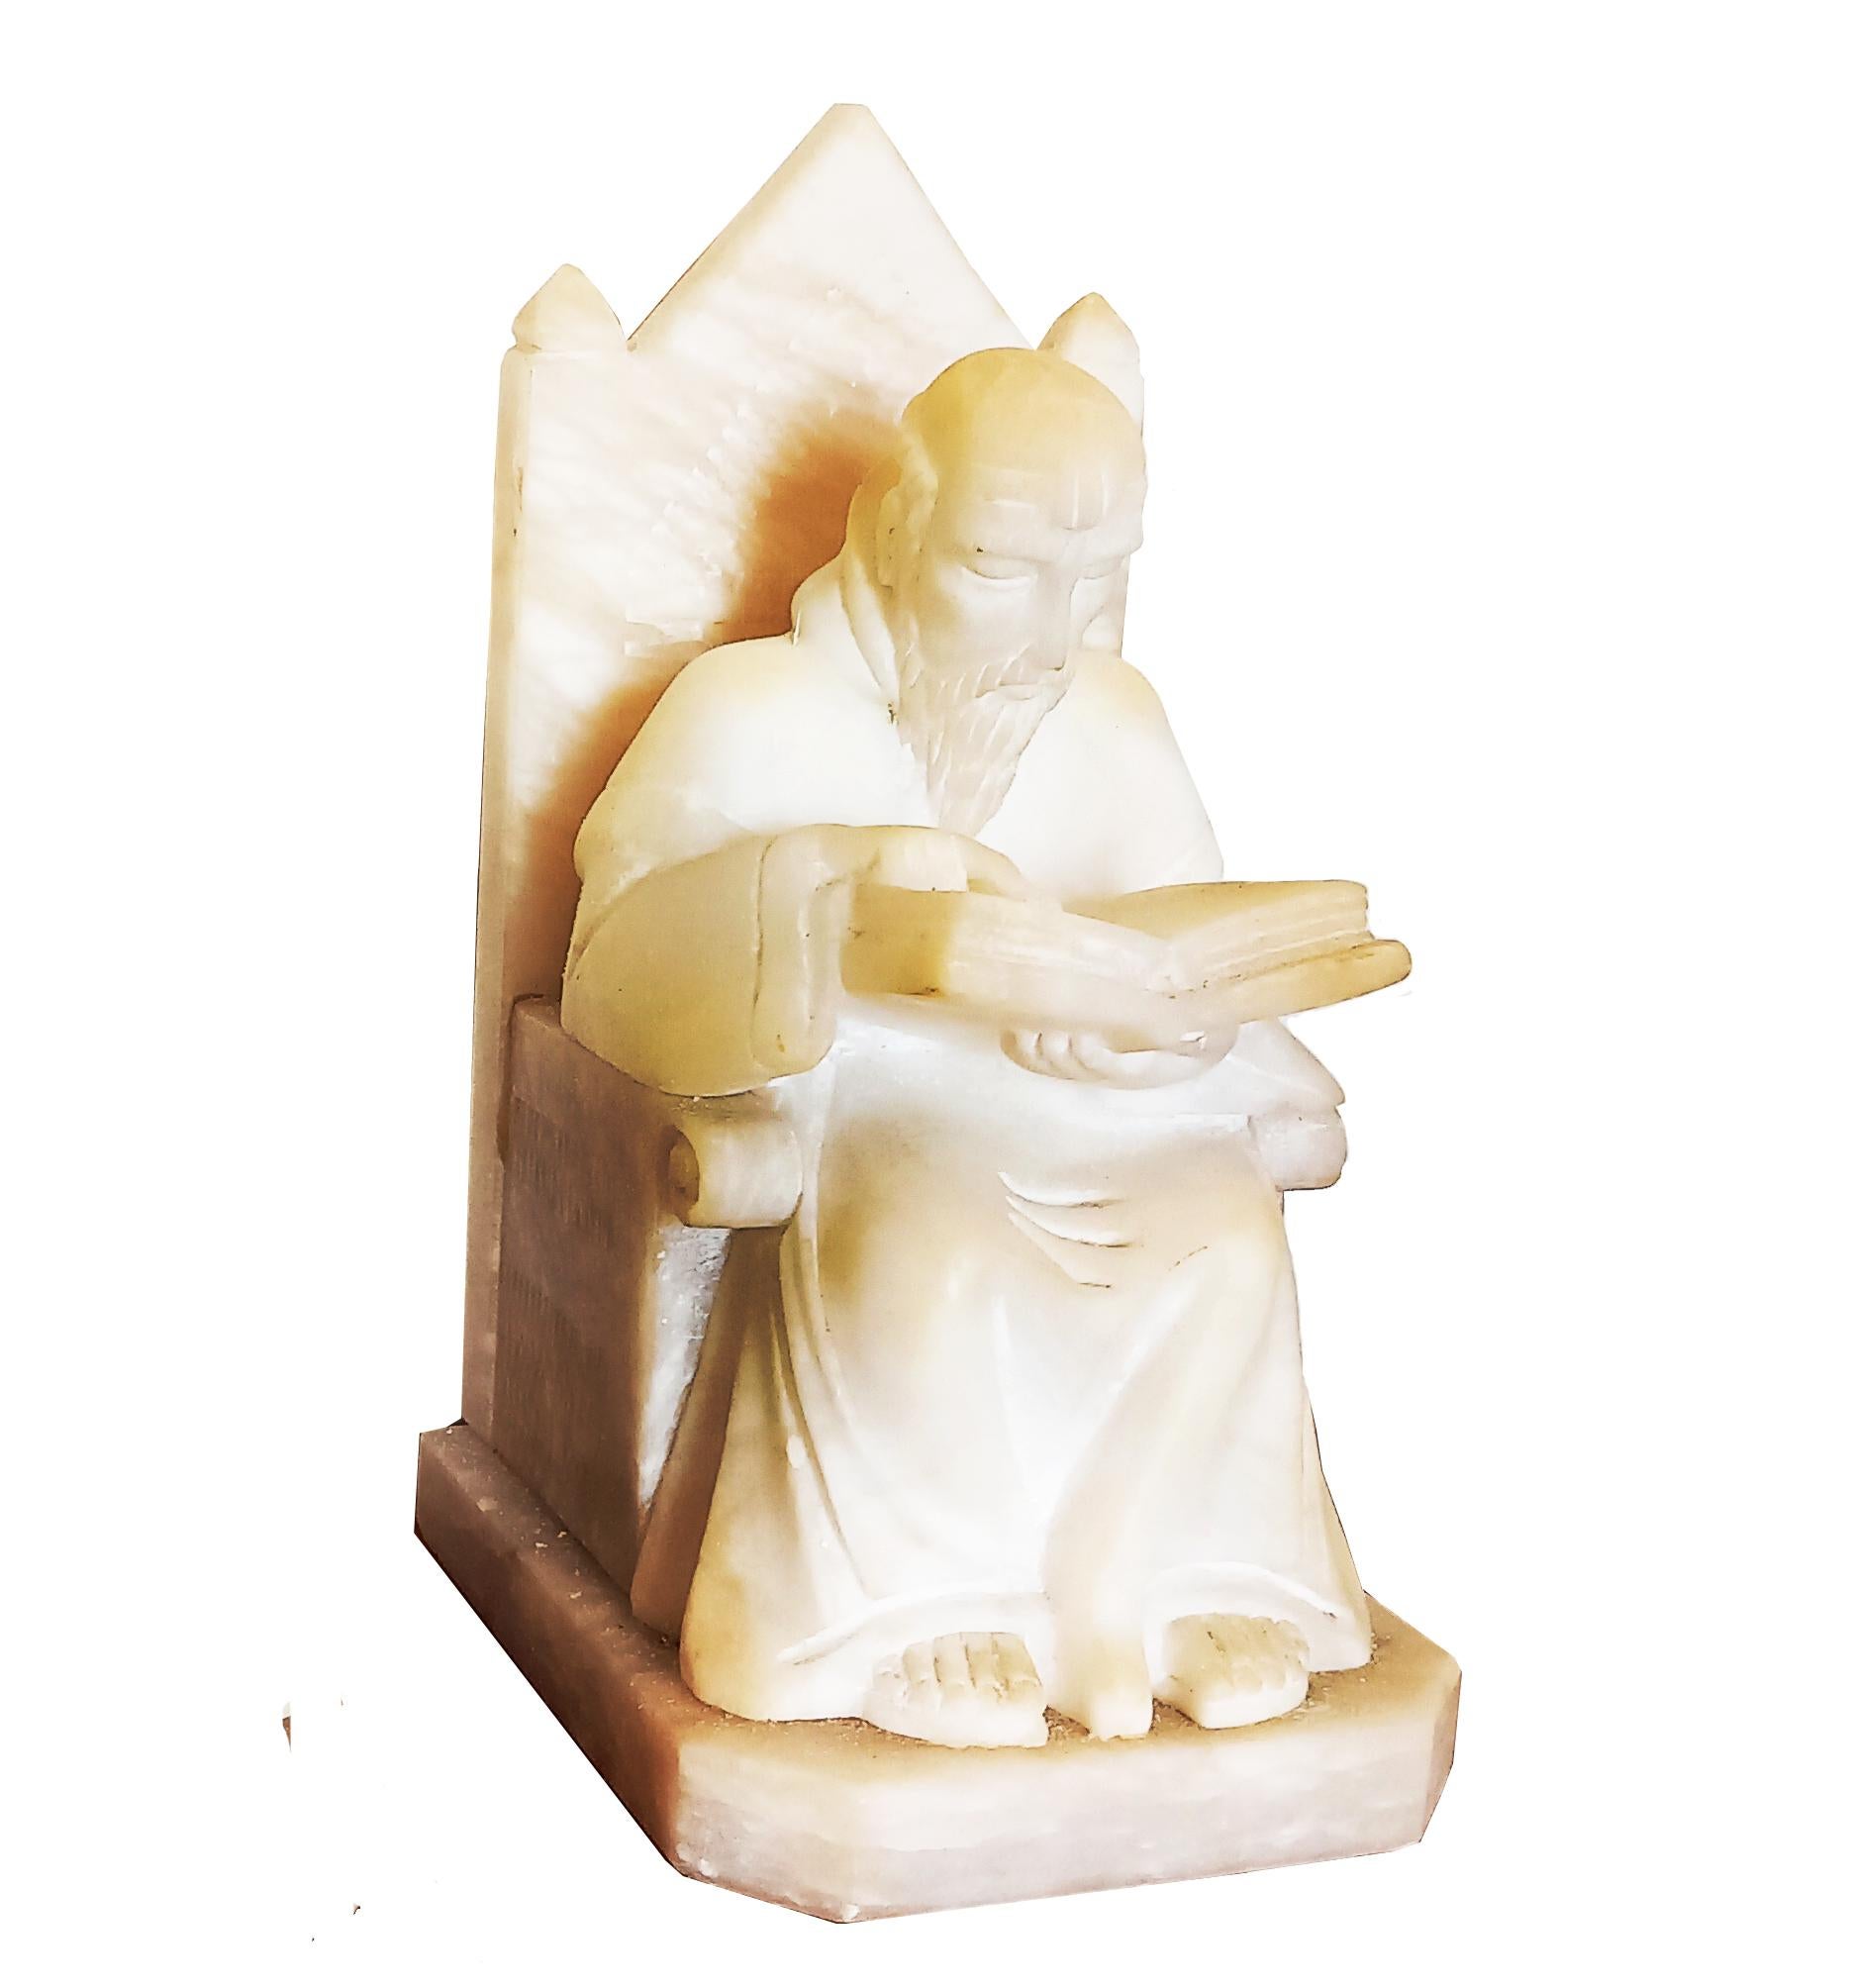 Library, Book, Throne, medieval, revival

Alabaster and marble bookends in the shape of monks sitting on a throne reading a book Medieval style figur of a monge carved on the albastro bench in Italian marble.

Library, Book, Throne, medieval,